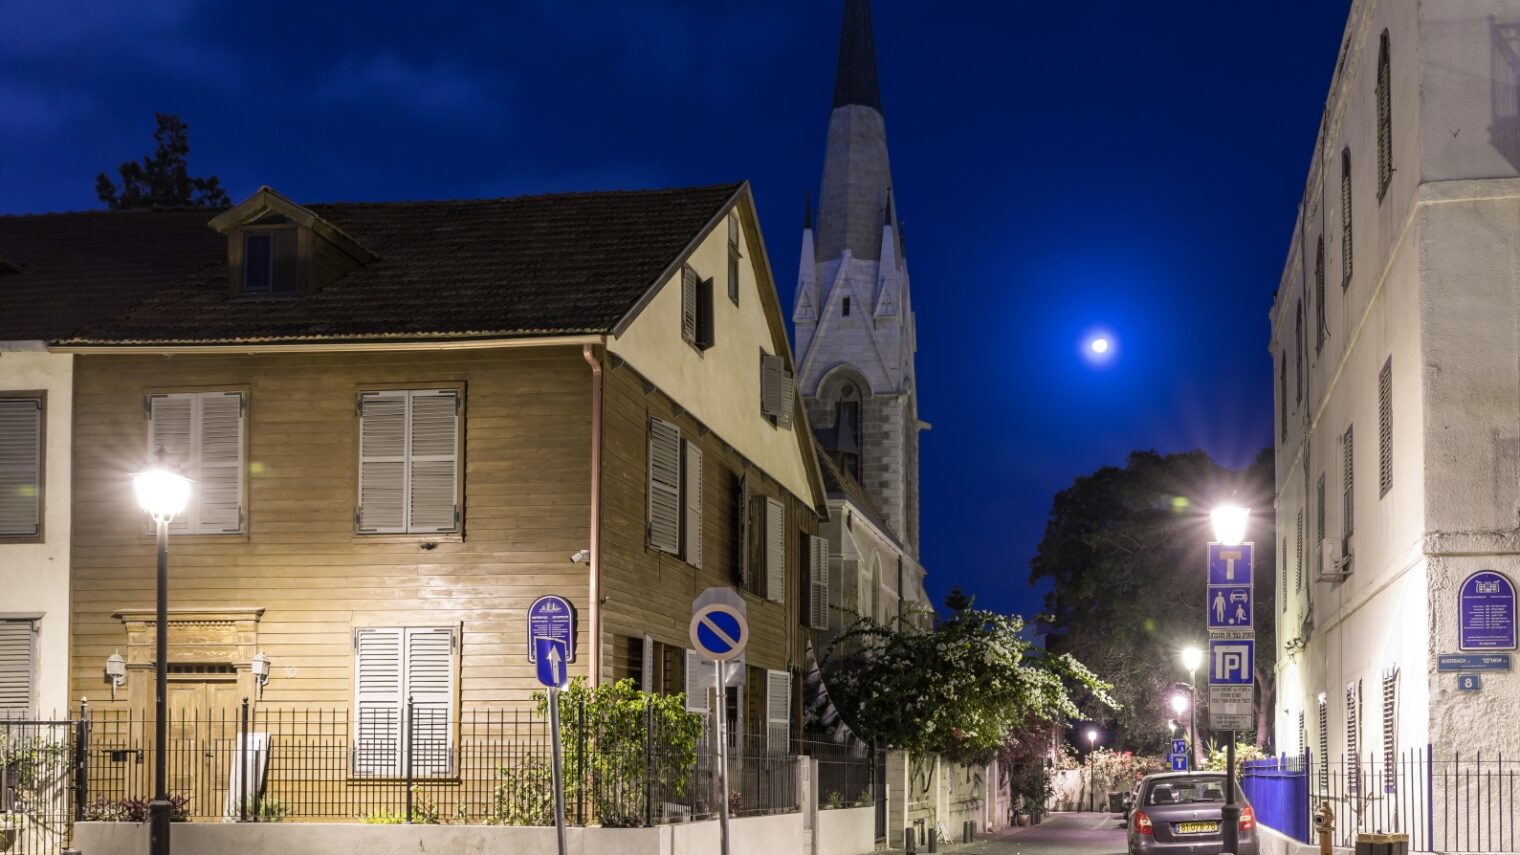 A view of Bar Hoffman and Auerbach streets in Tel Aviv’s American Colony, showing Maine Friendship House and Immanuel Church on left, Beit Immanuel on right. Photo by Dmitriy Feldman Svarshik/Shutterstock.com